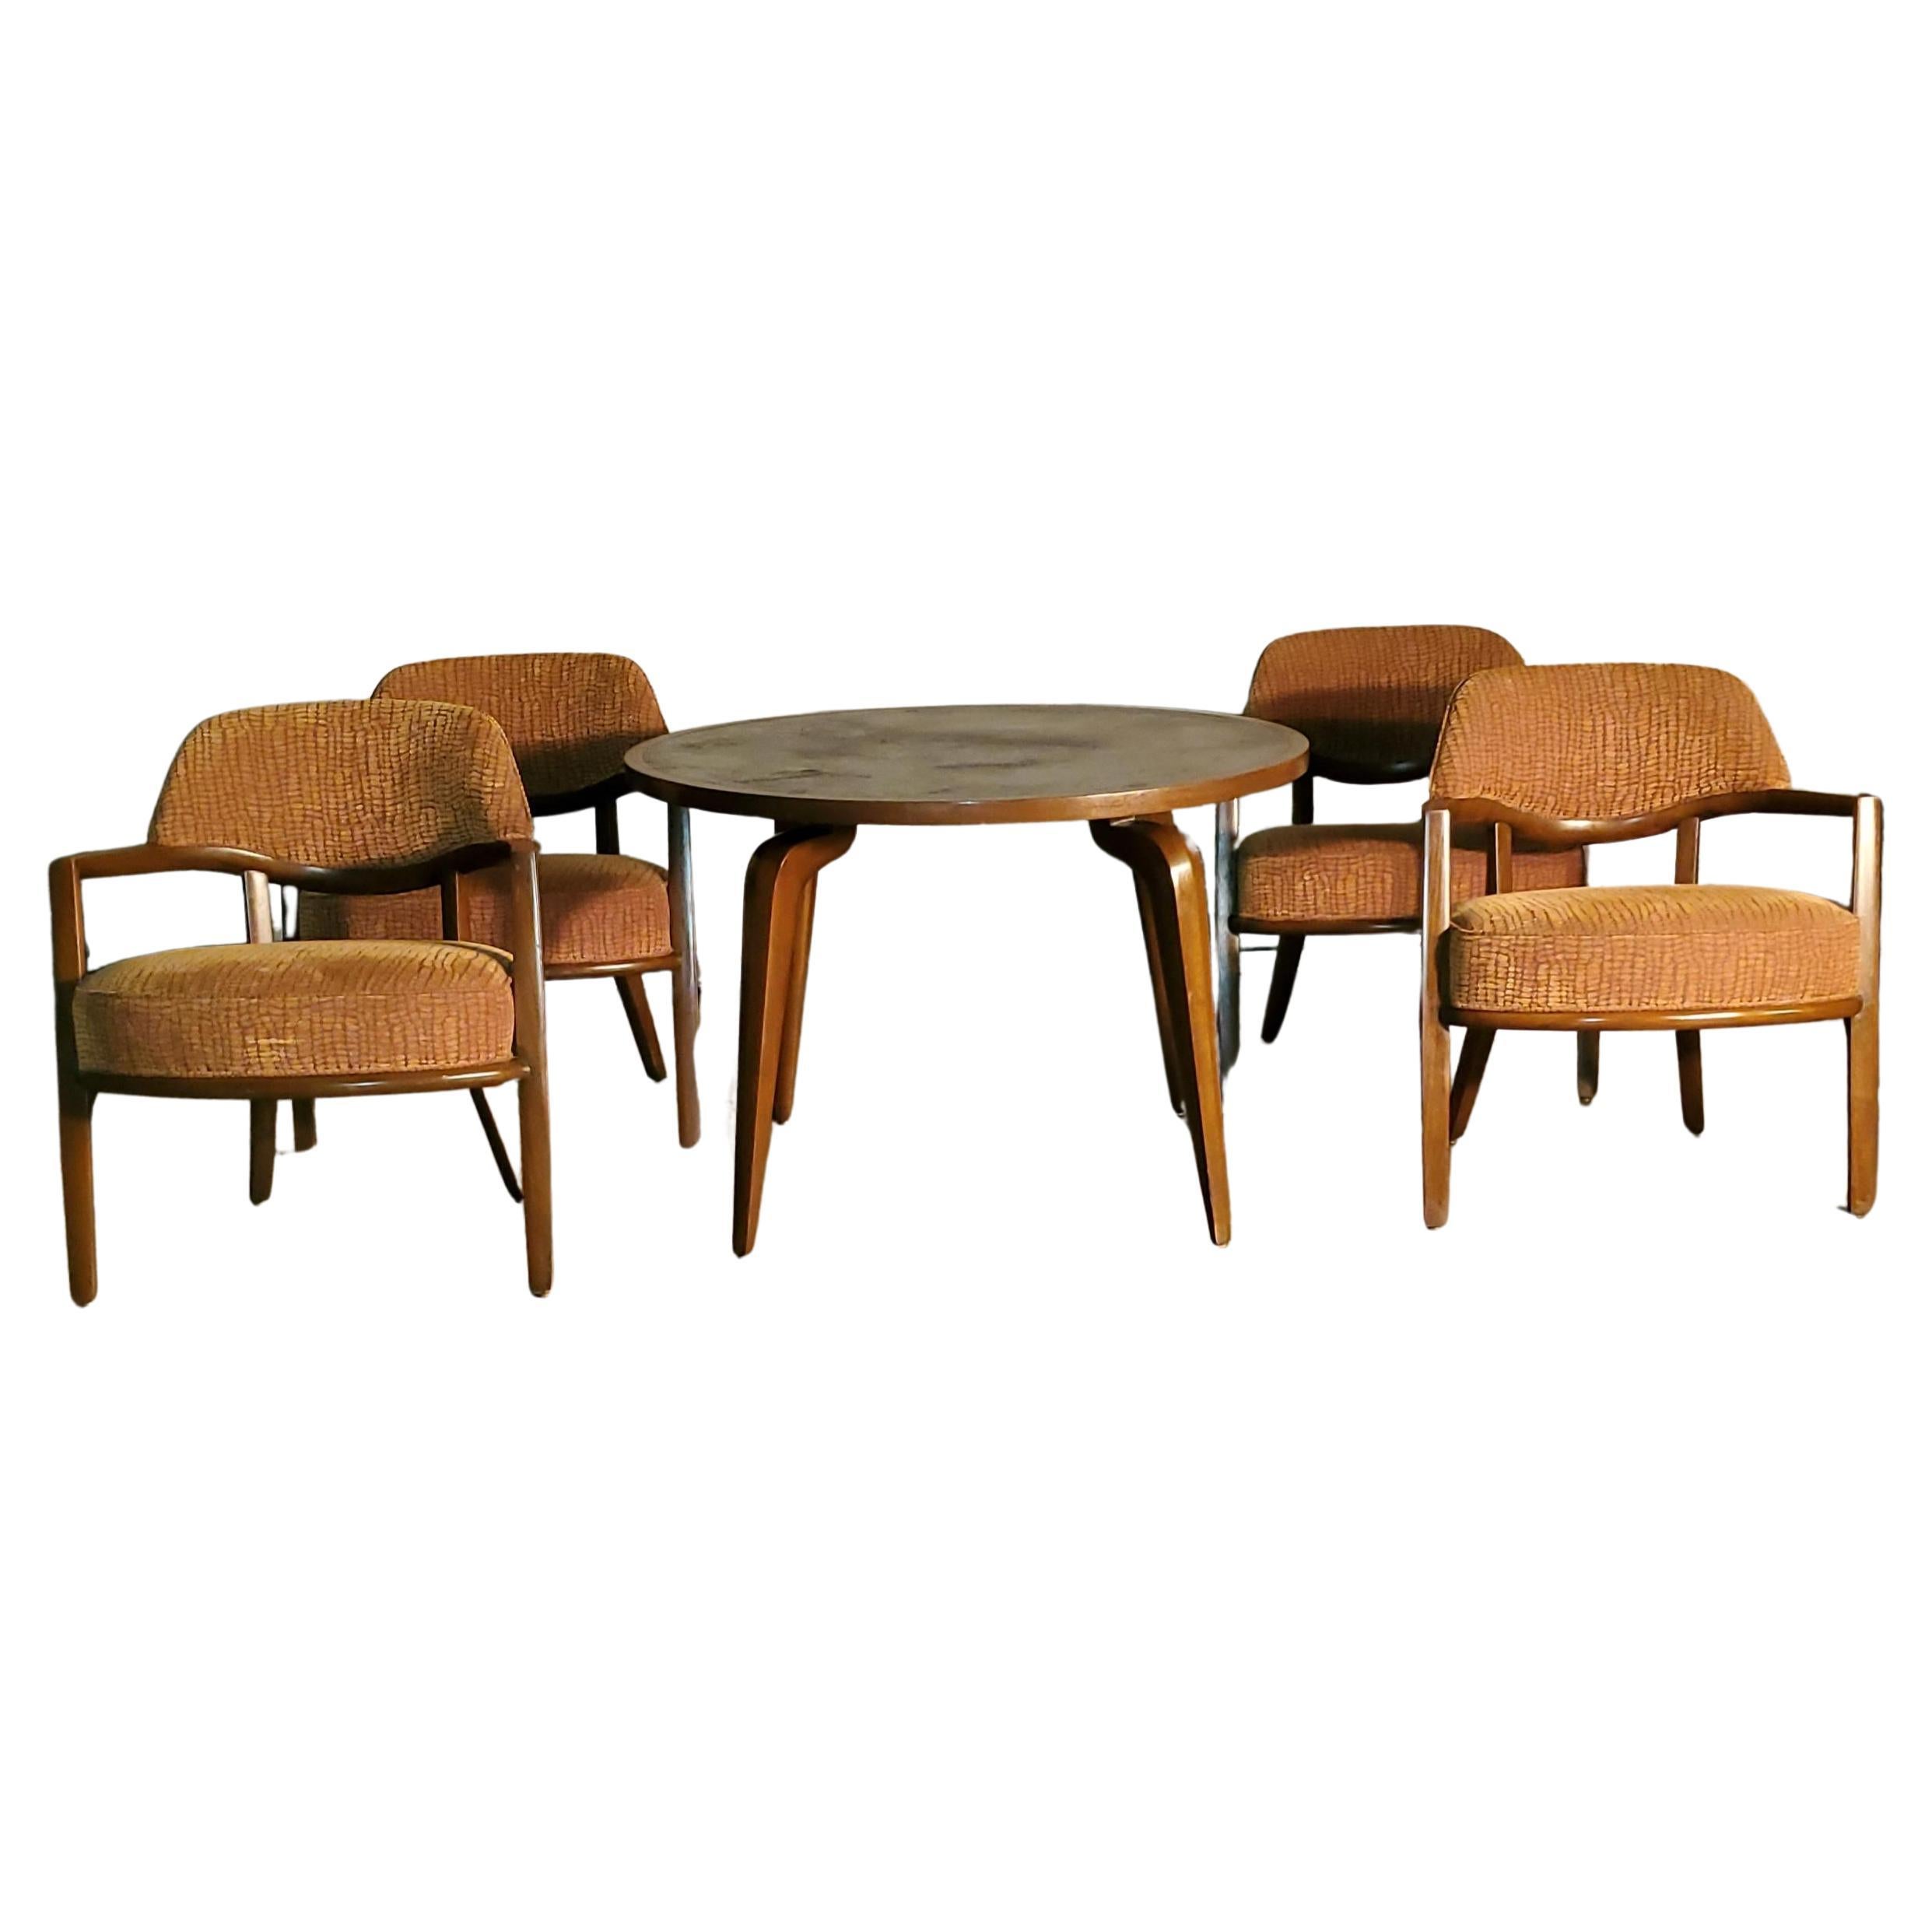 RARE 1950s Maurice Bailey Monteverdi Young Card Table & 4 Maurice Bailey Chairs For Sale